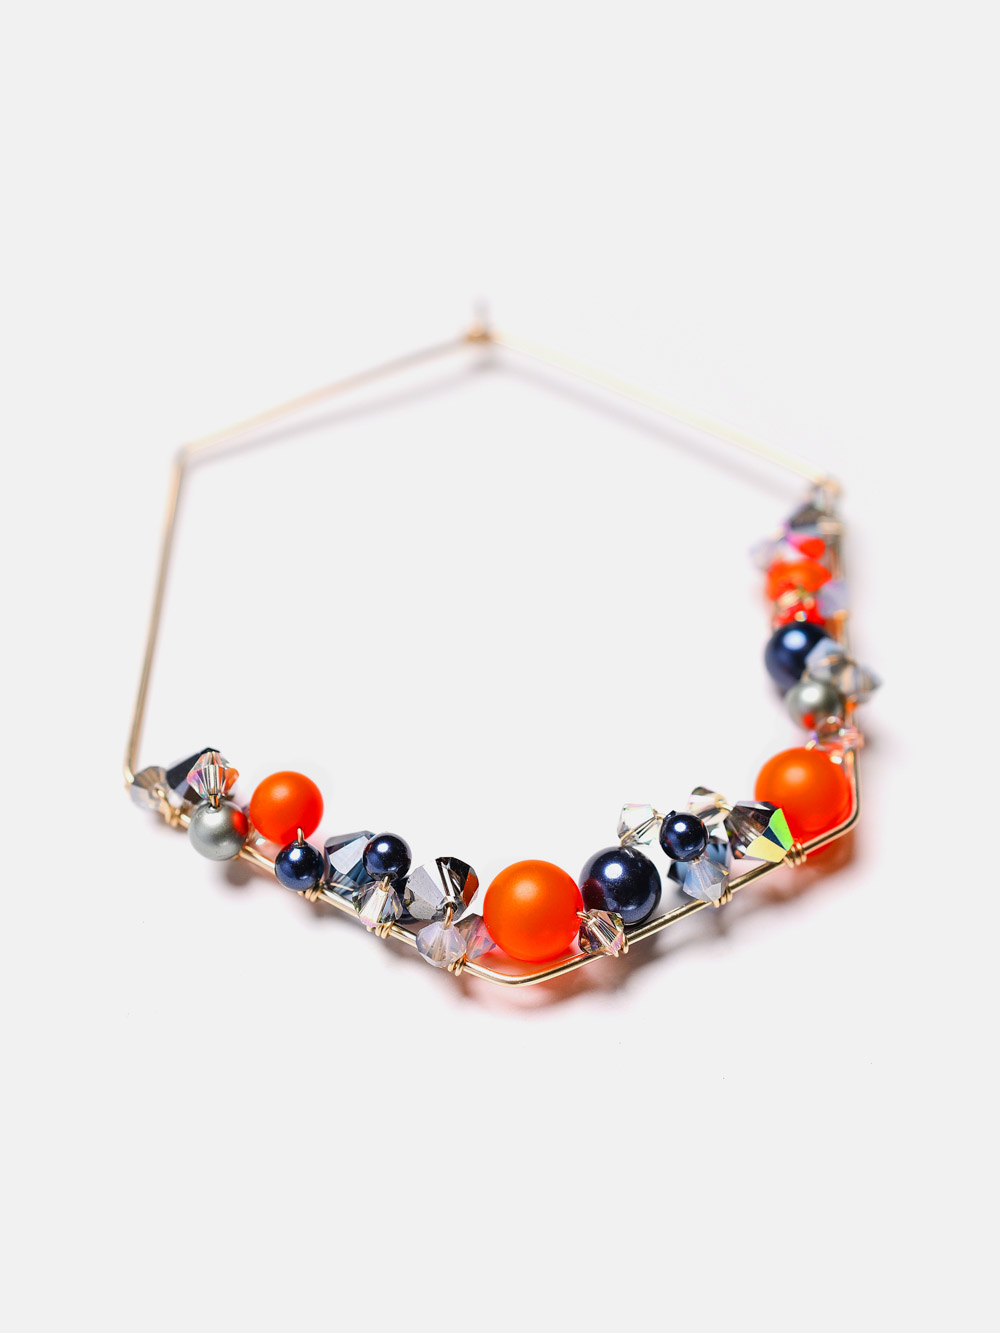 Endlessly wearable, these hexagon pieces are an original interpretation of a modern hoop earrings. Handcrafted in 14K gold-filled featuring neon orange pearls and colorful crystals.